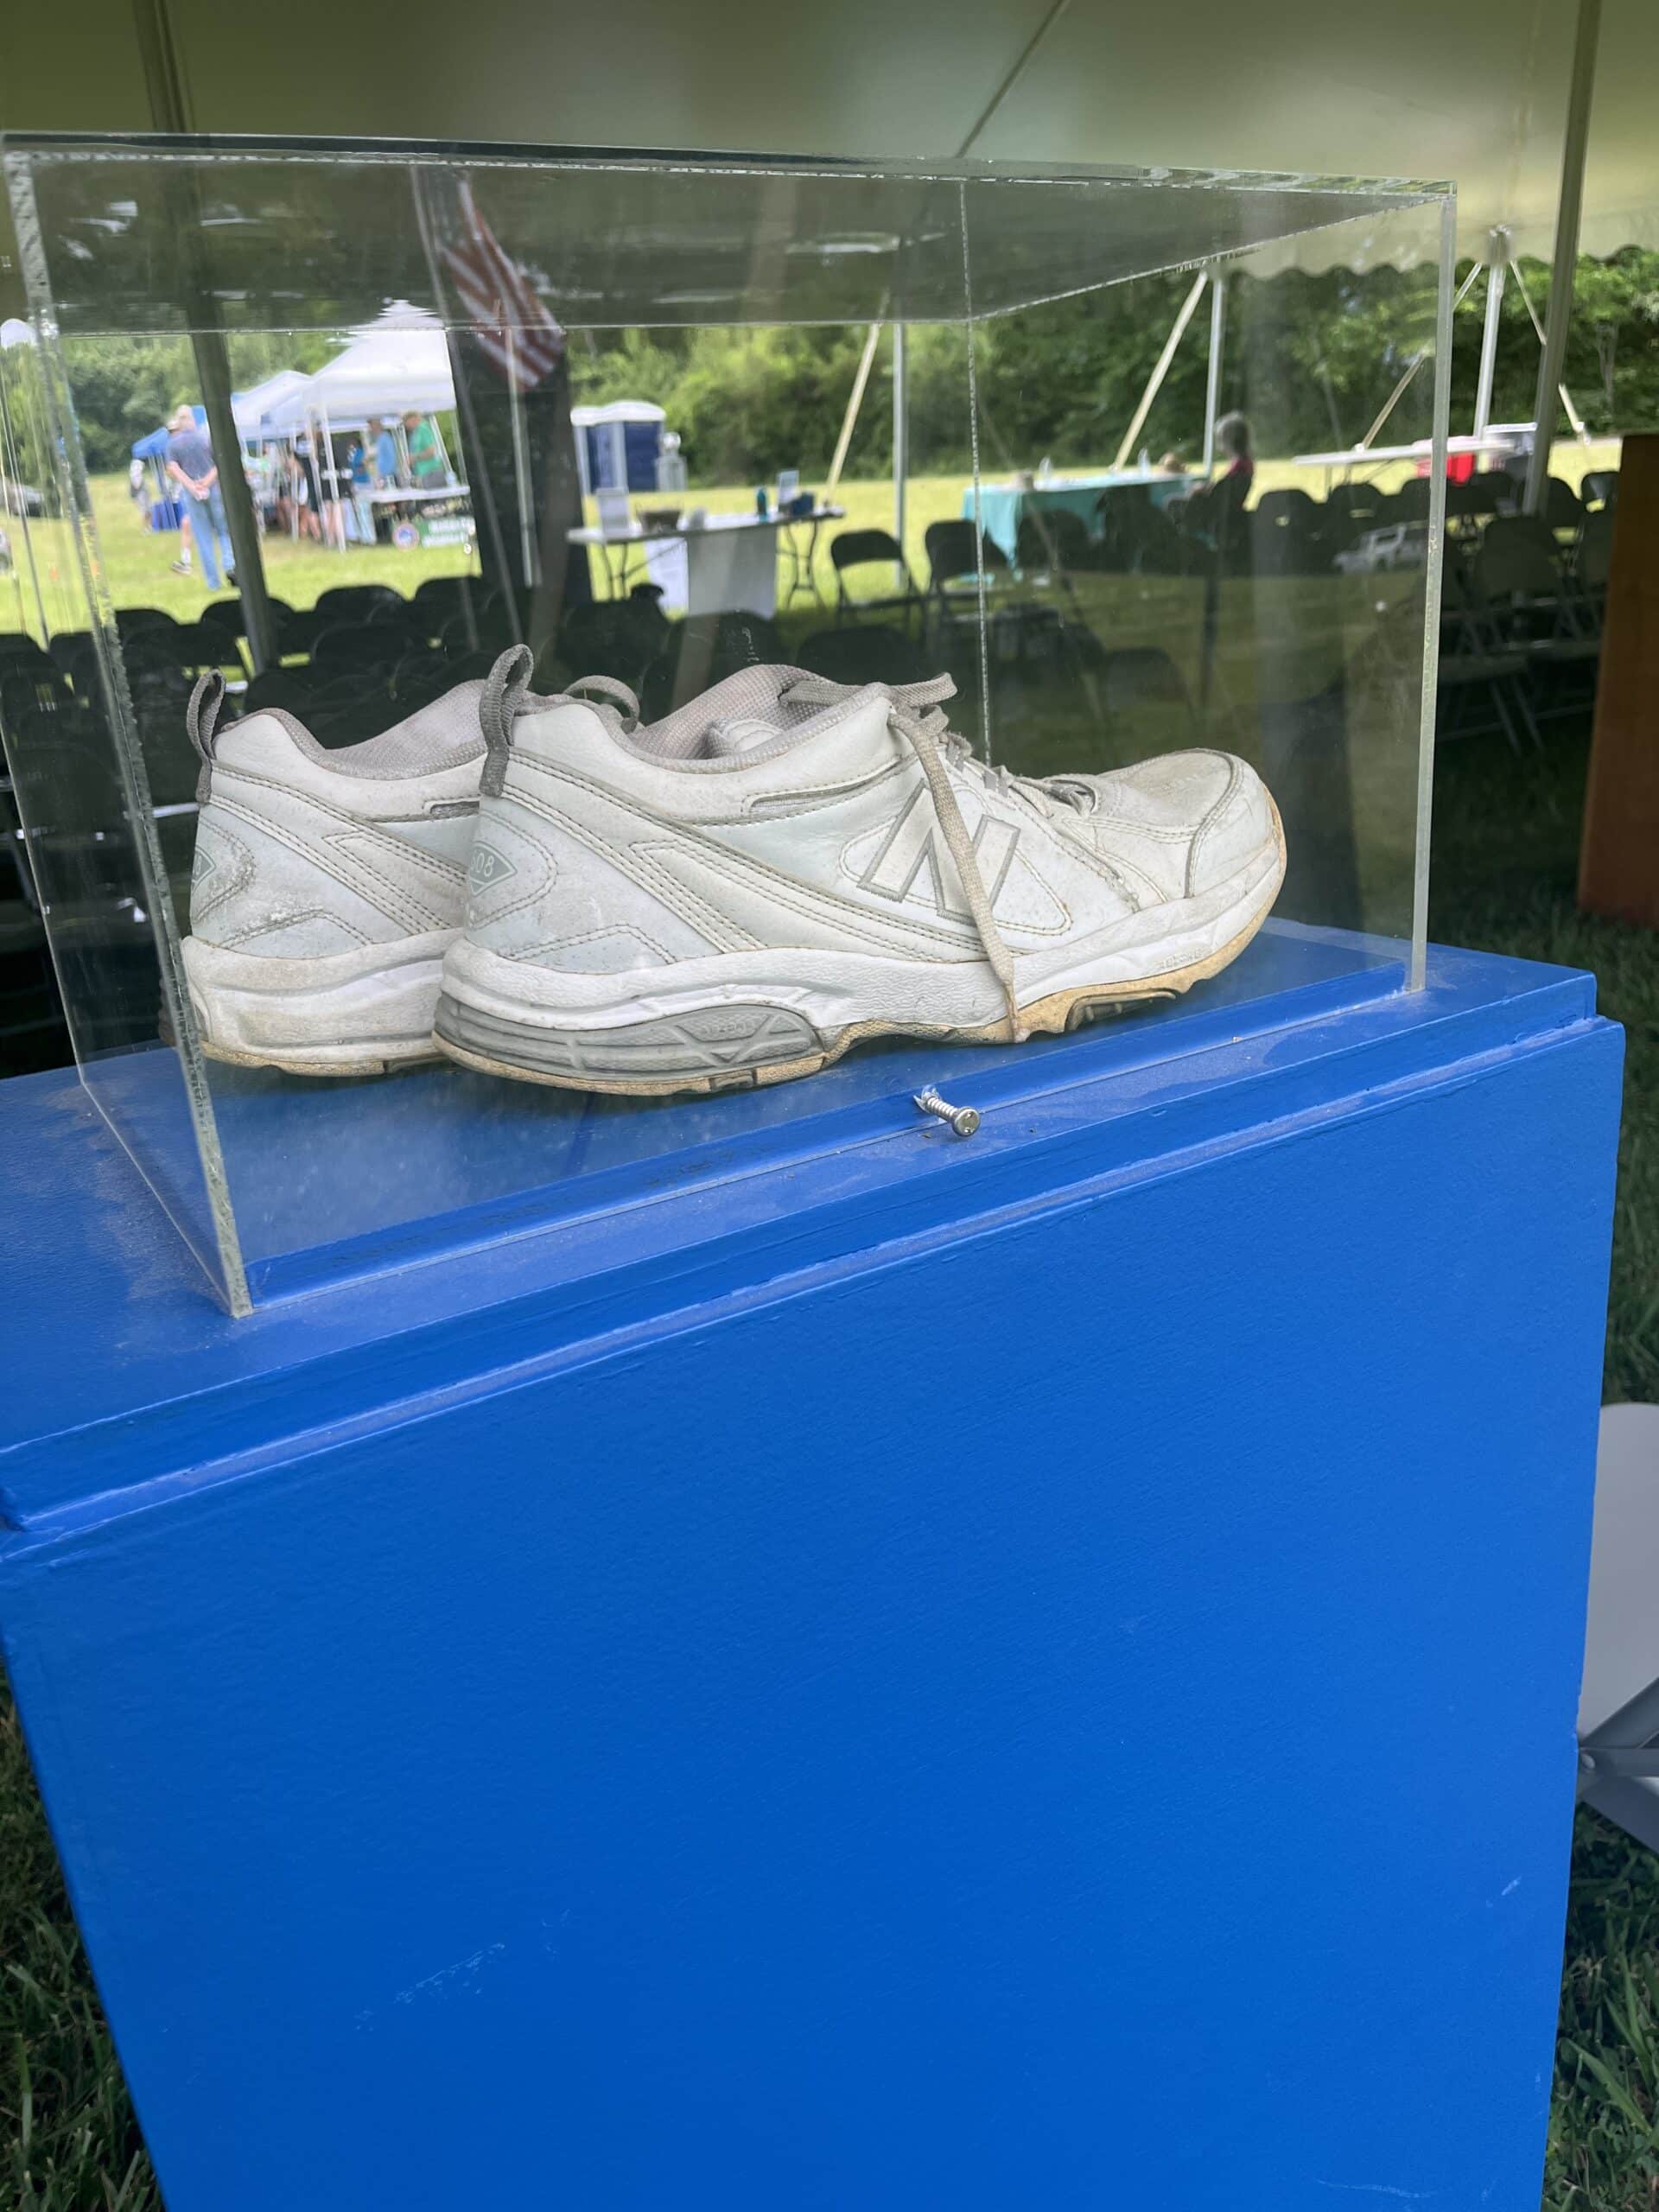 A pair of white shoes in a clear display case